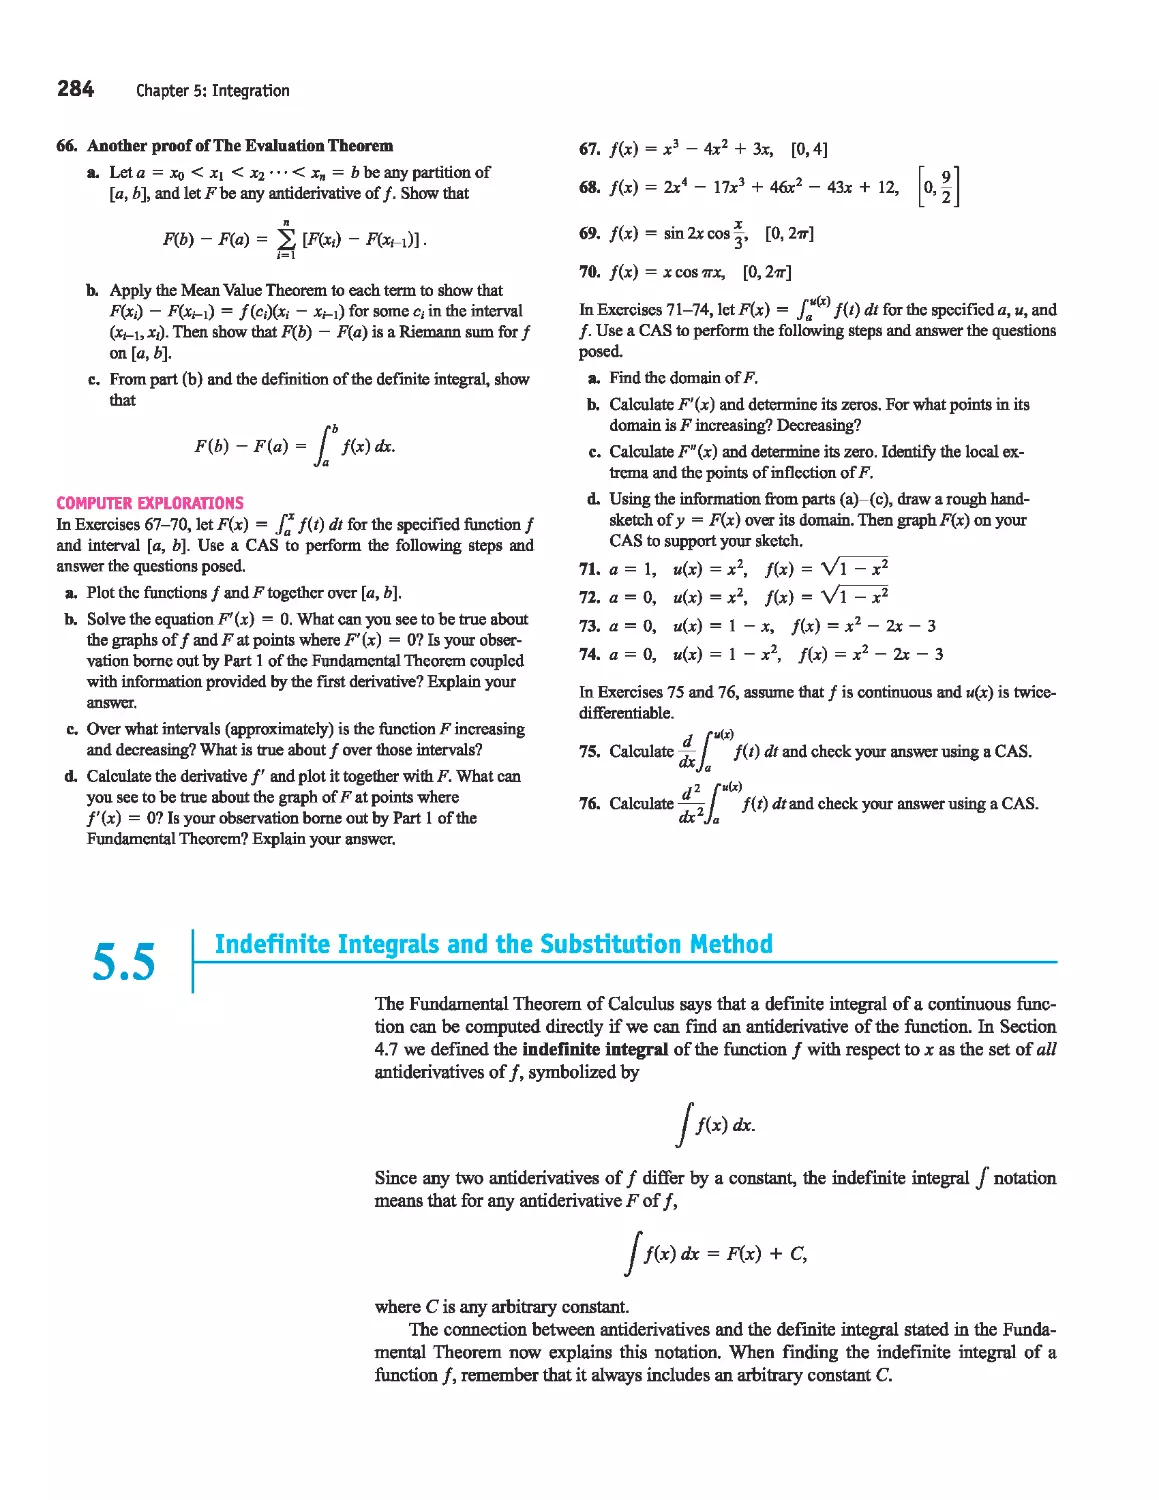 5.5 - Indefinite Integrals and the Substitution Method